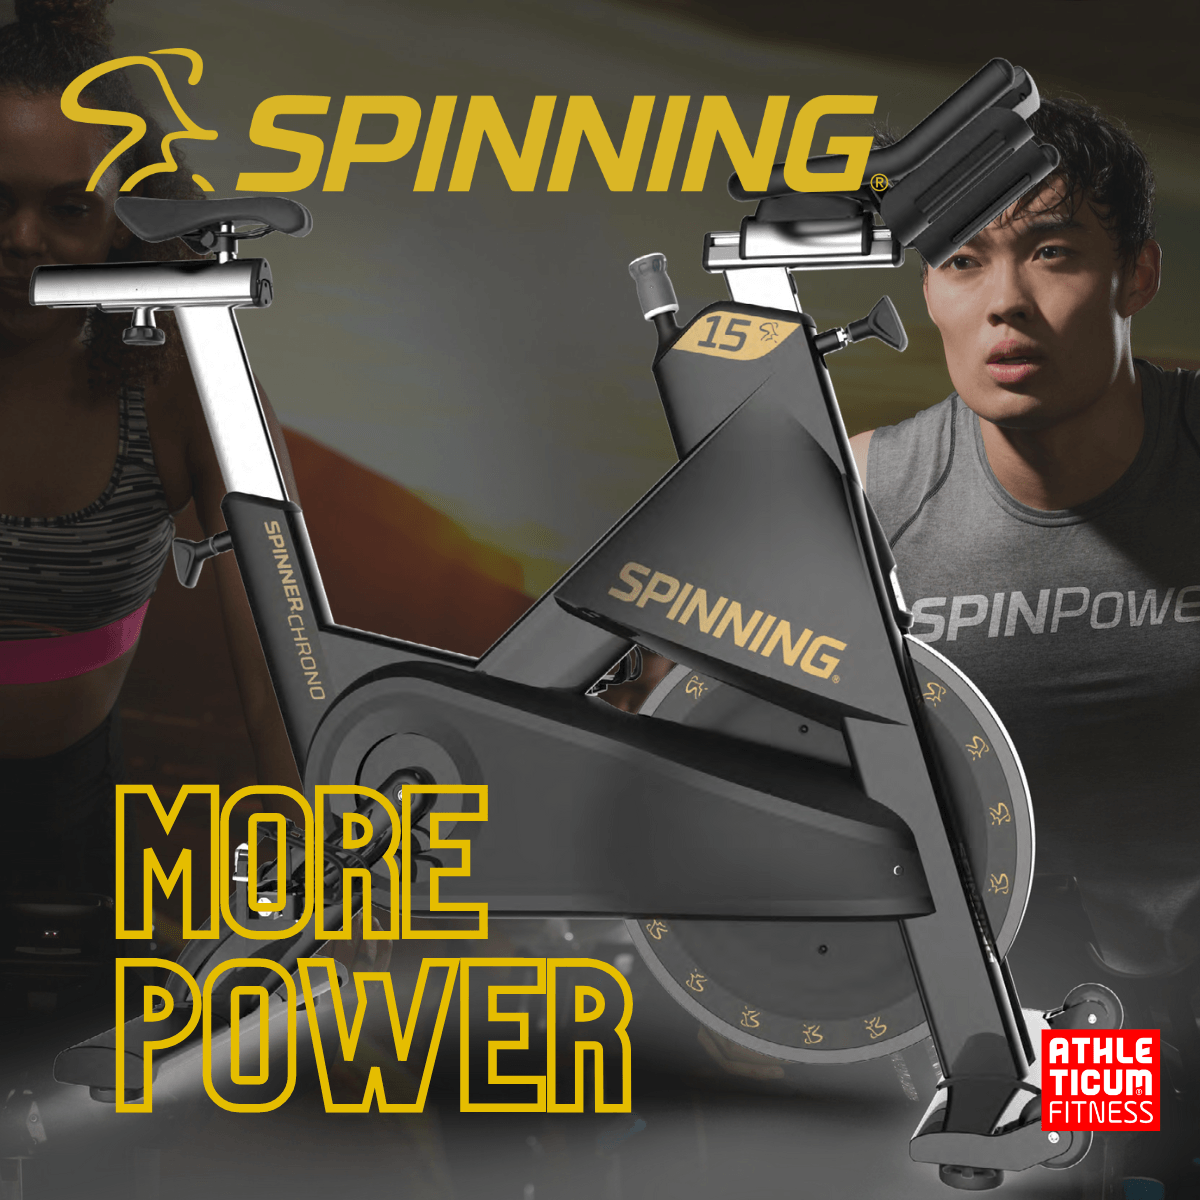 Spinning® launches new Rage of Power Bikes and more! - Athleticum Fitness